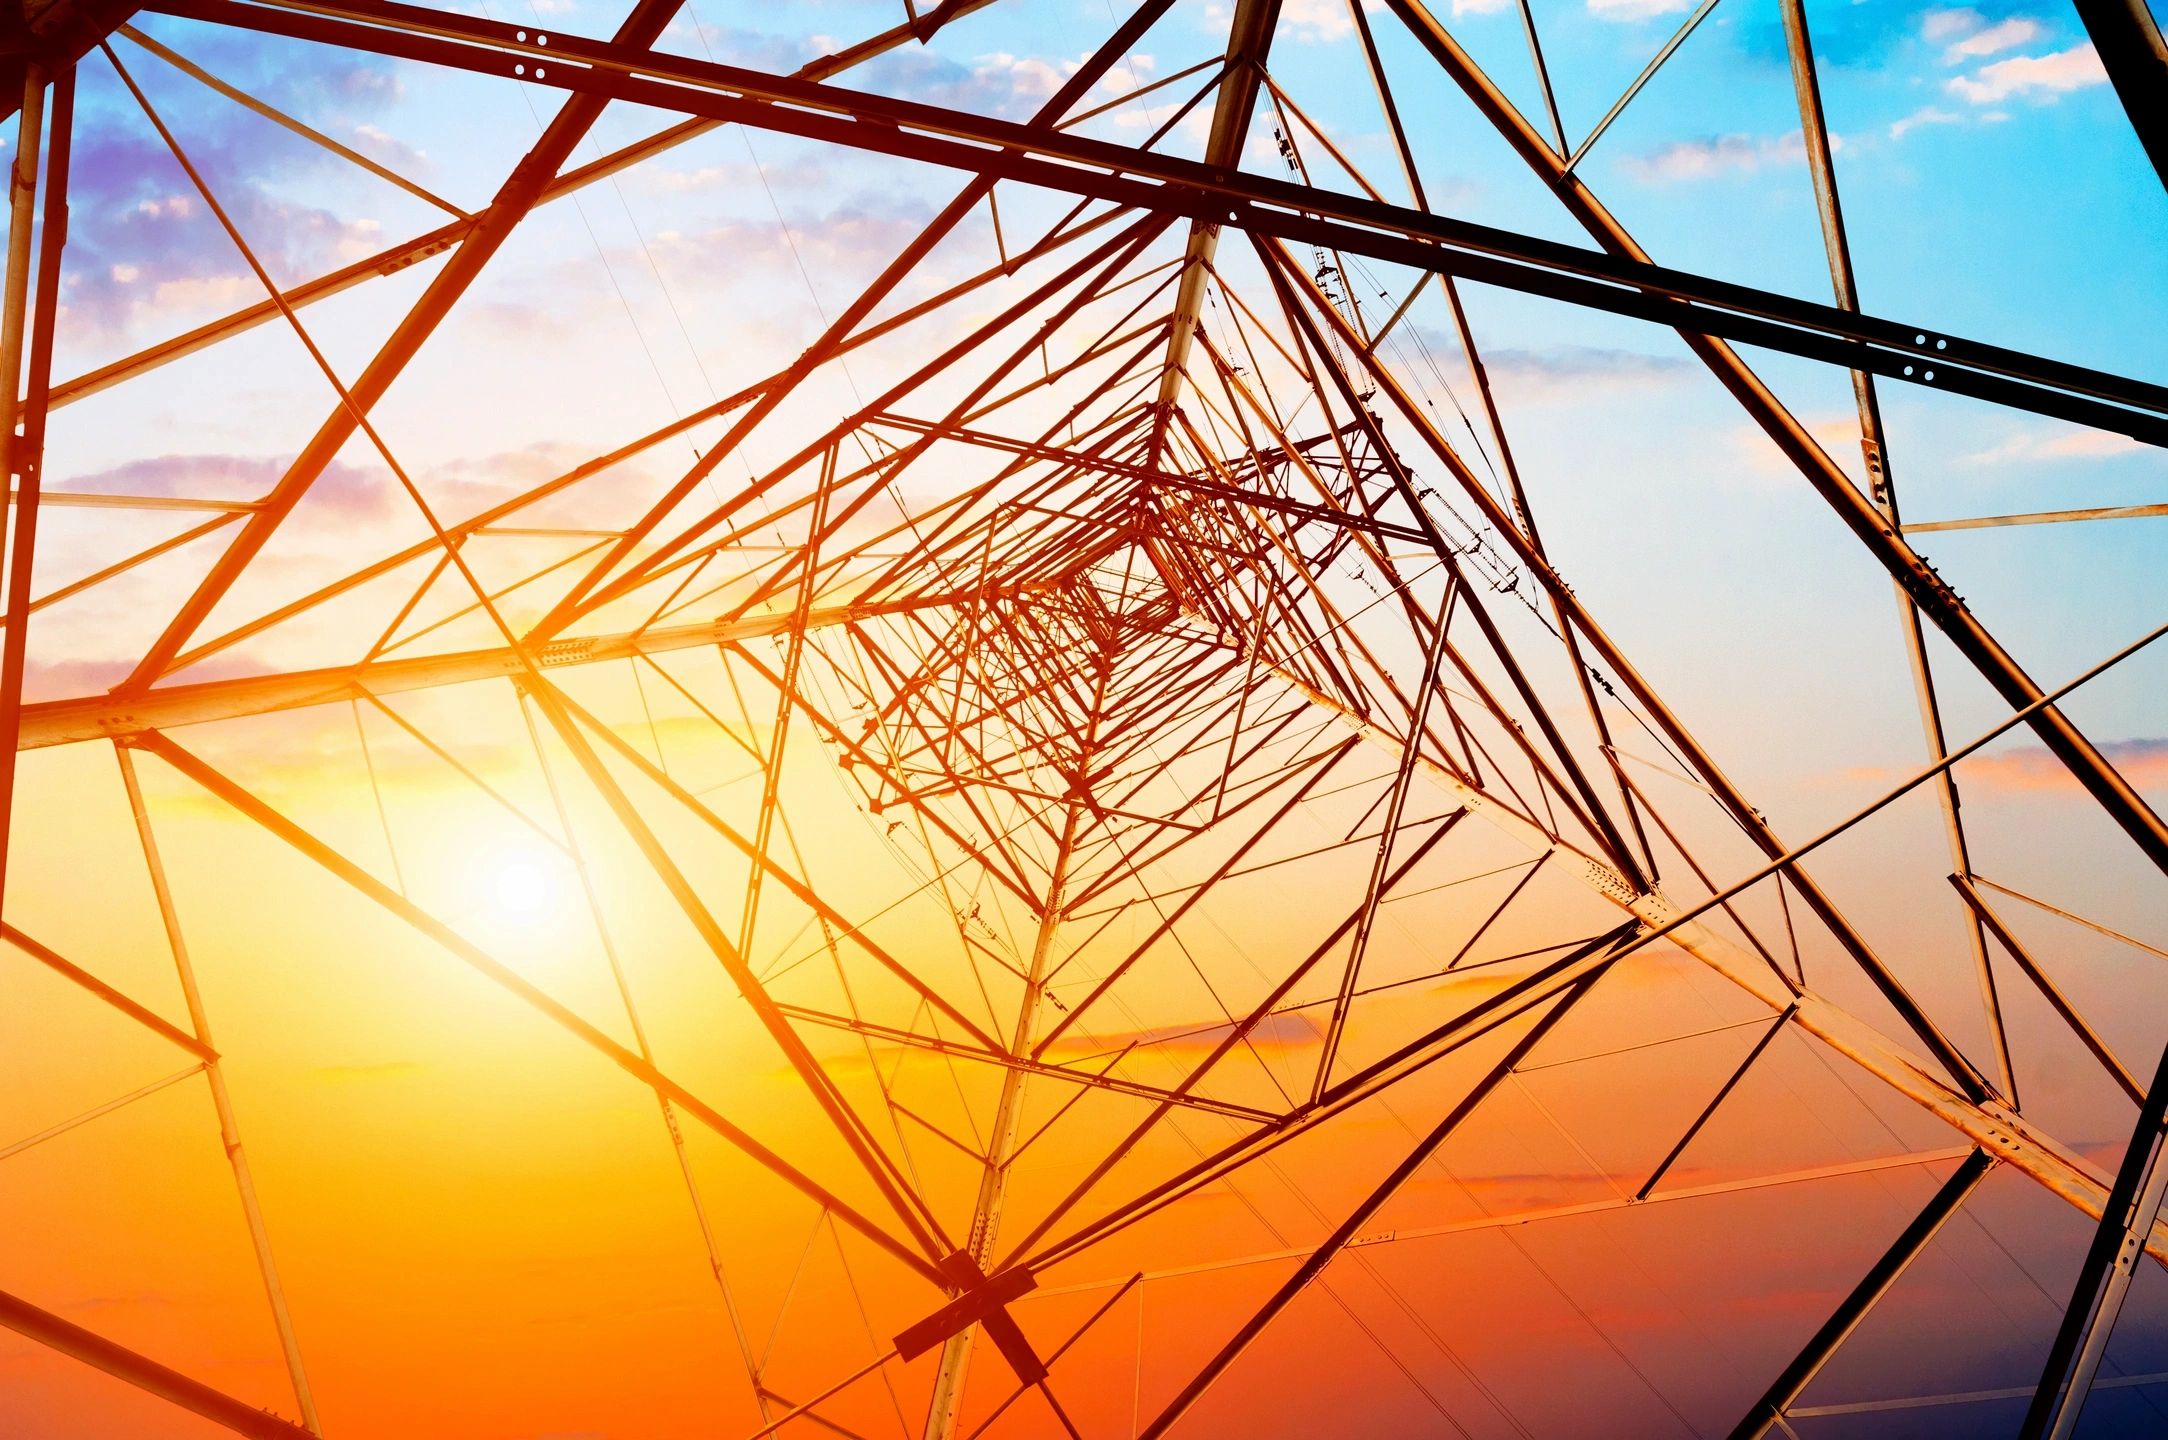 The Latest Impacts of Grid Strain, Microgrids, and Other Trends Affecting the Utility Industry